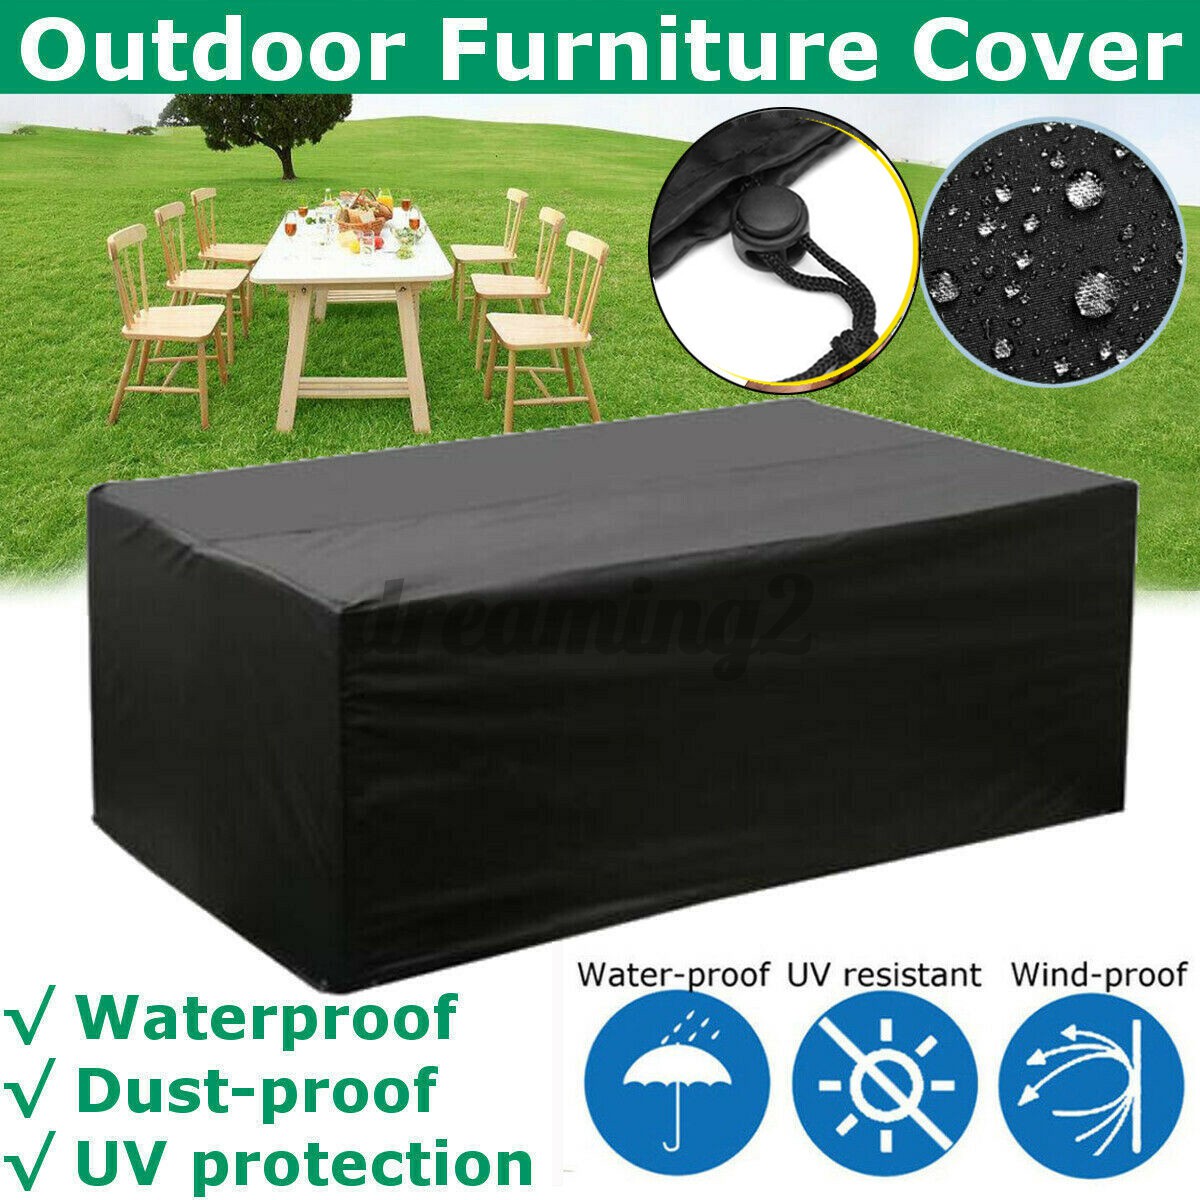 Outsunny Waterproof Garden Patio Furniture Set Cover Outdoor Table Cube Chairs DREAMING2